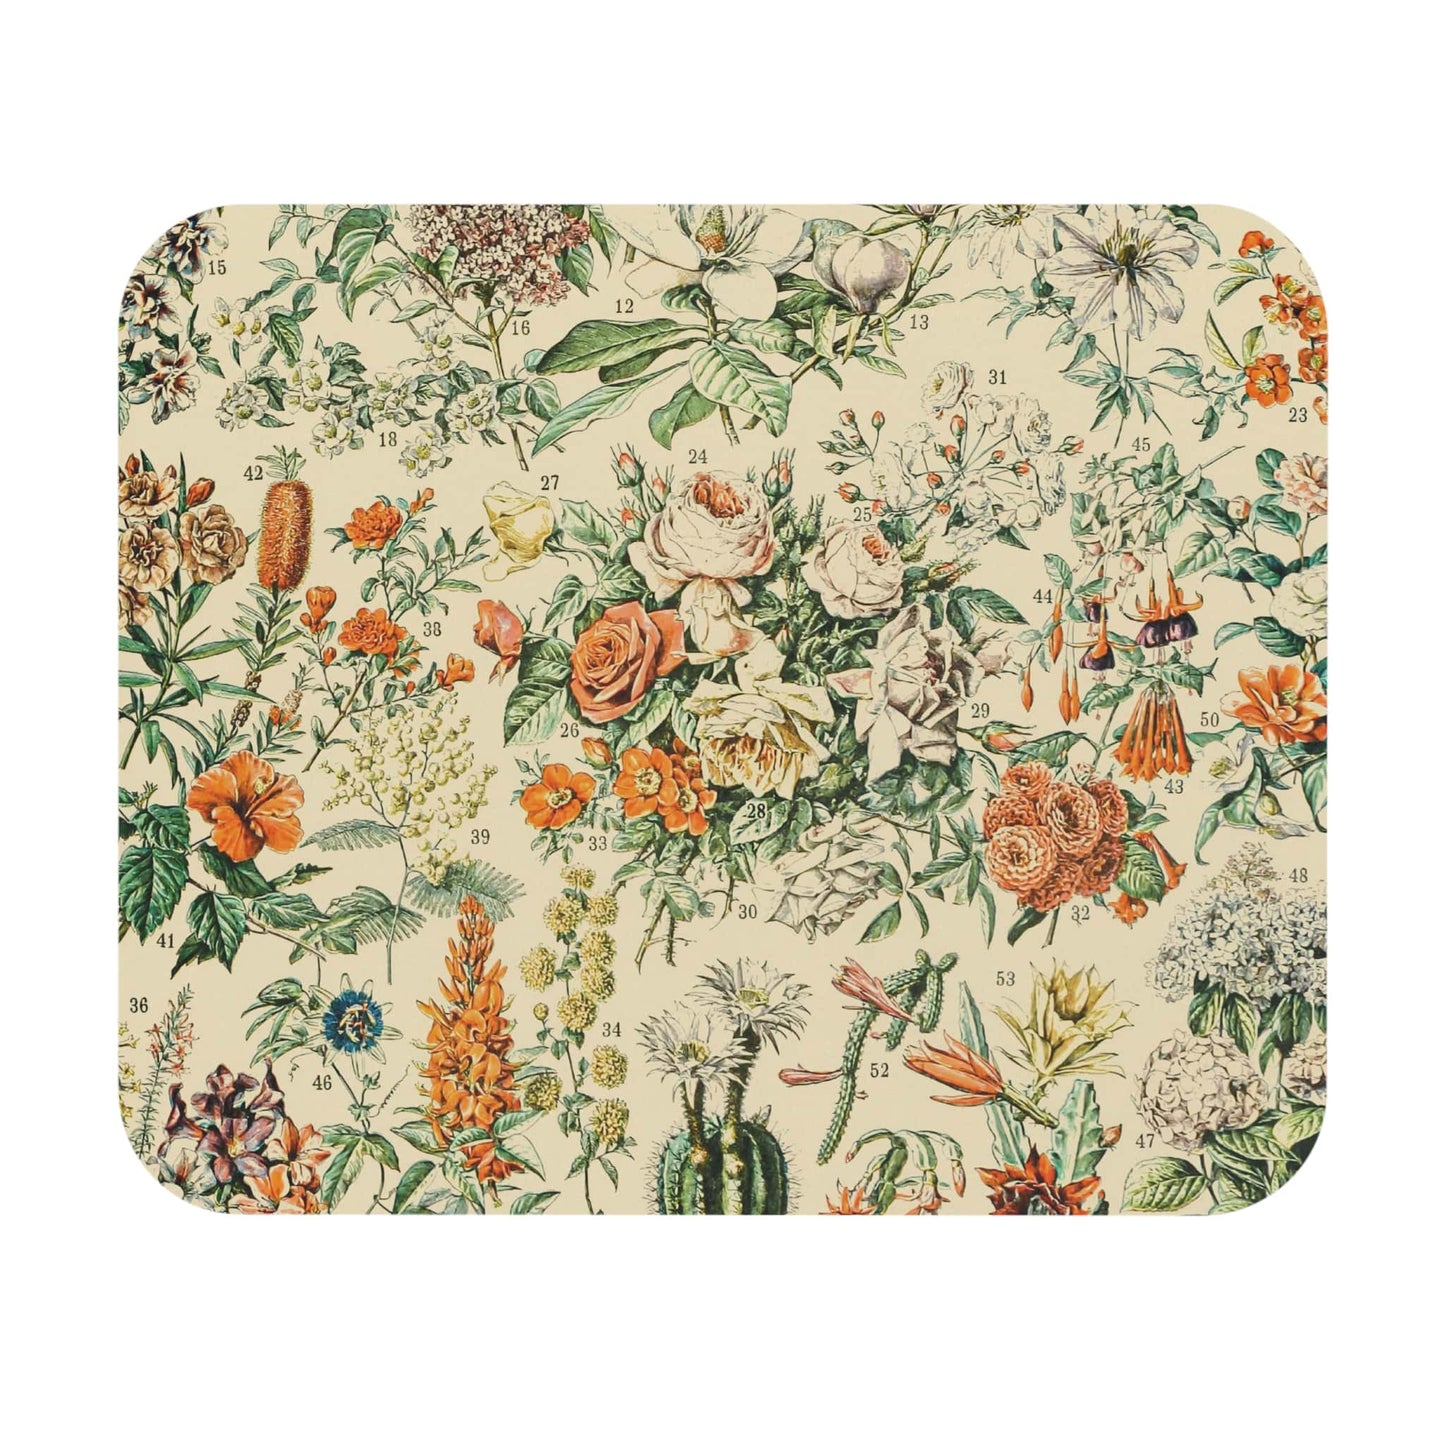 Flowers and Plants Mouse Pad with wildflower design, desk and office decor showcasing diverse wildflower artwork.